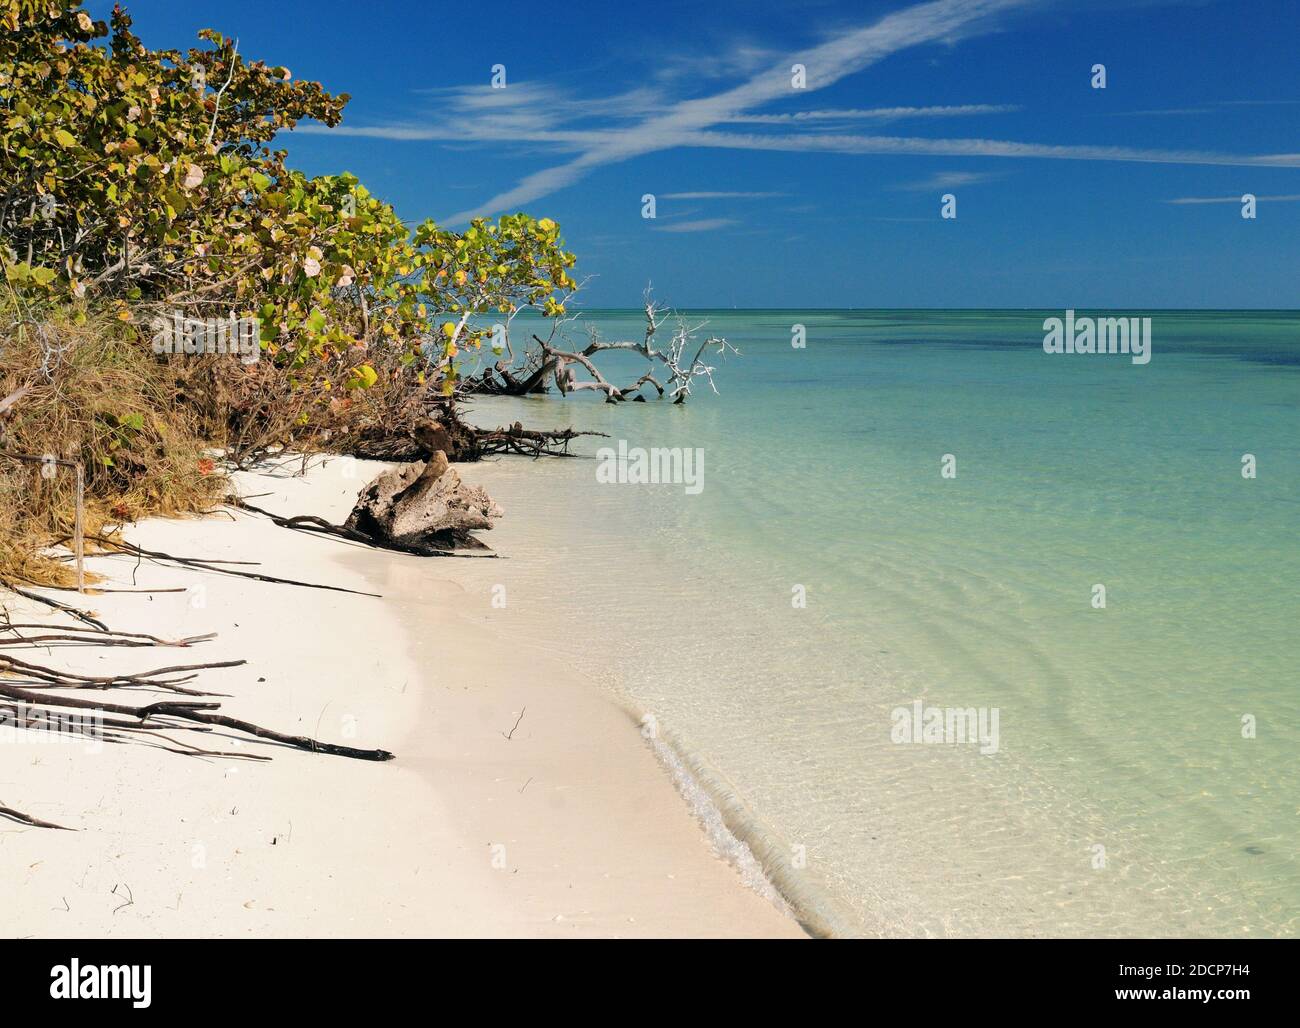 Tropical Beach On The Silver Trail In Bahia Honda State Park On A Sunny Autumn Day With A Clear Blue Sky And A Few Clouds Stock Photo